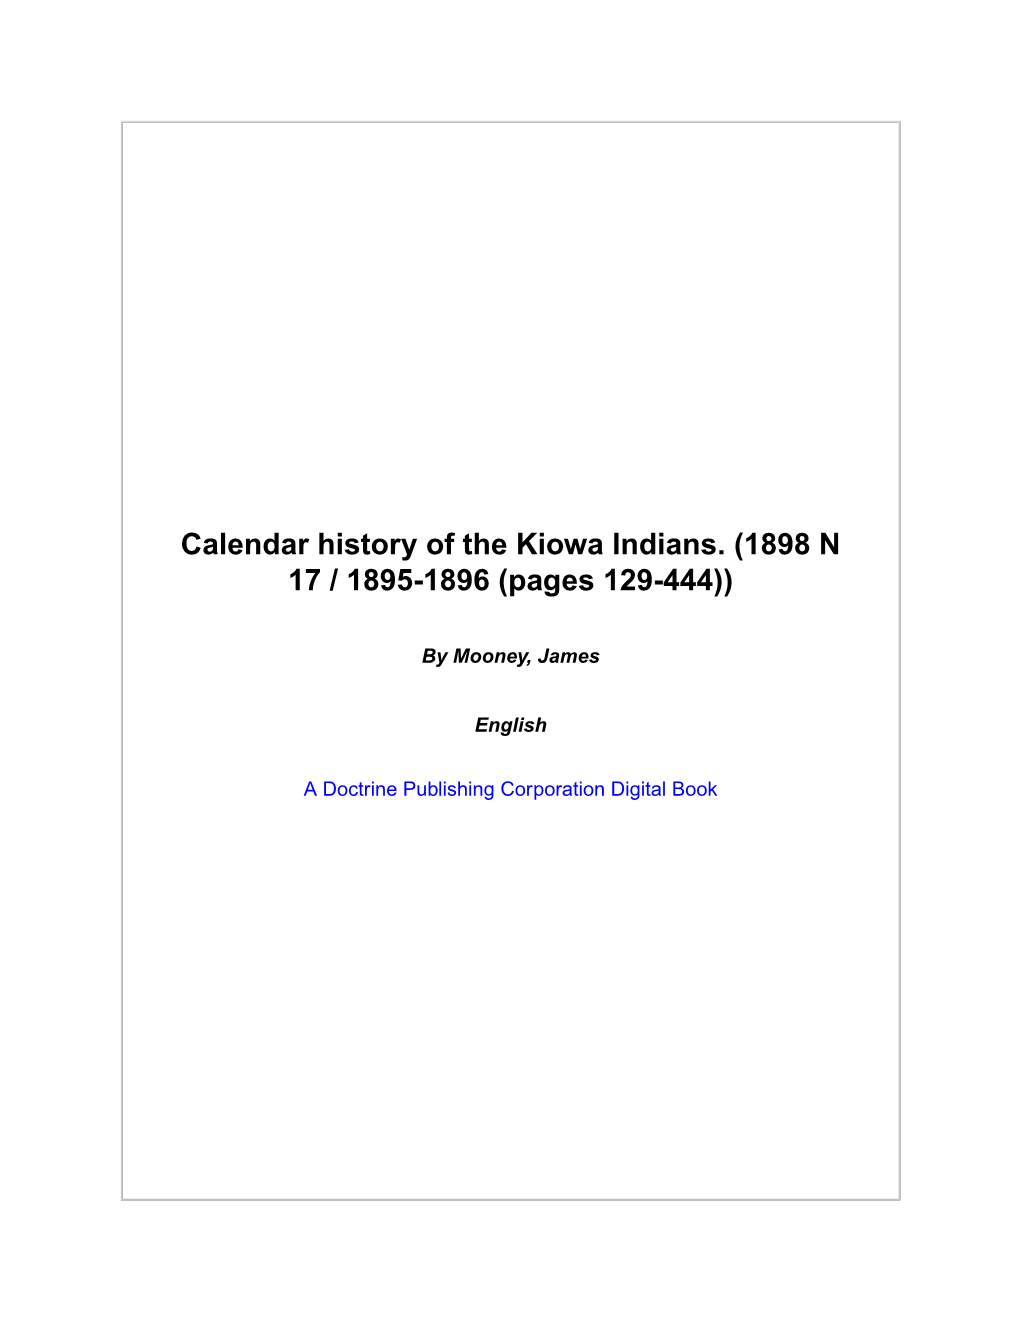 Calendar History of the Kiowa Indians. (1898 N 17 / 1895-1896 (Pages 129-444))